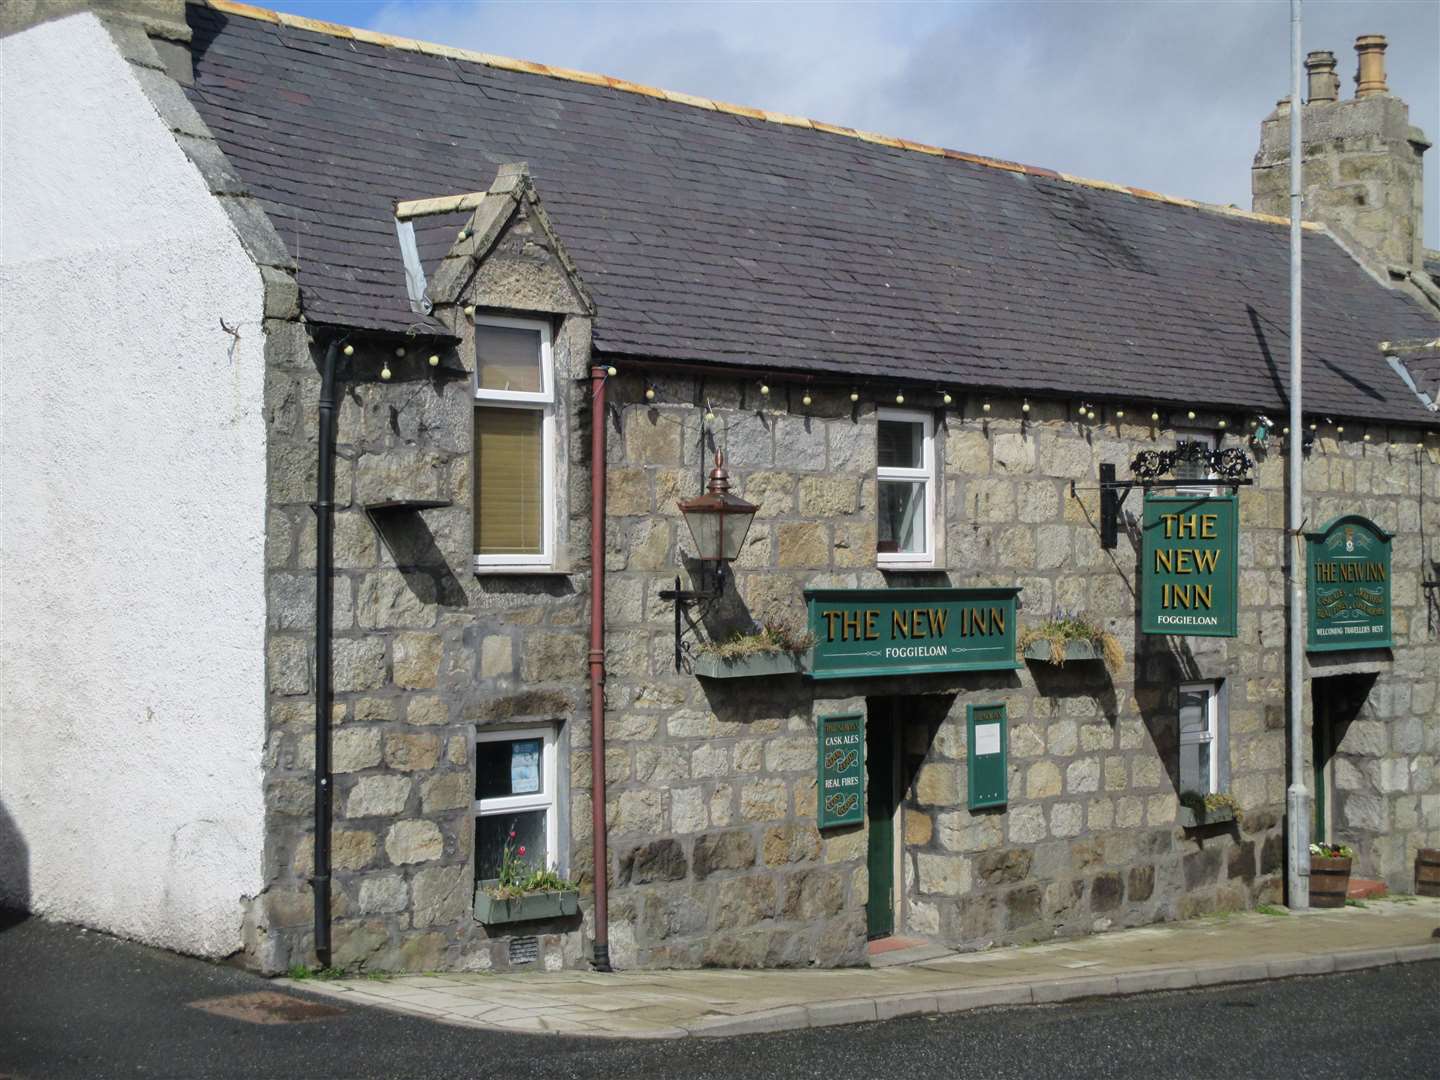 Plans have been lodged to create a micro brewery in the New Inn in Aberchirder.